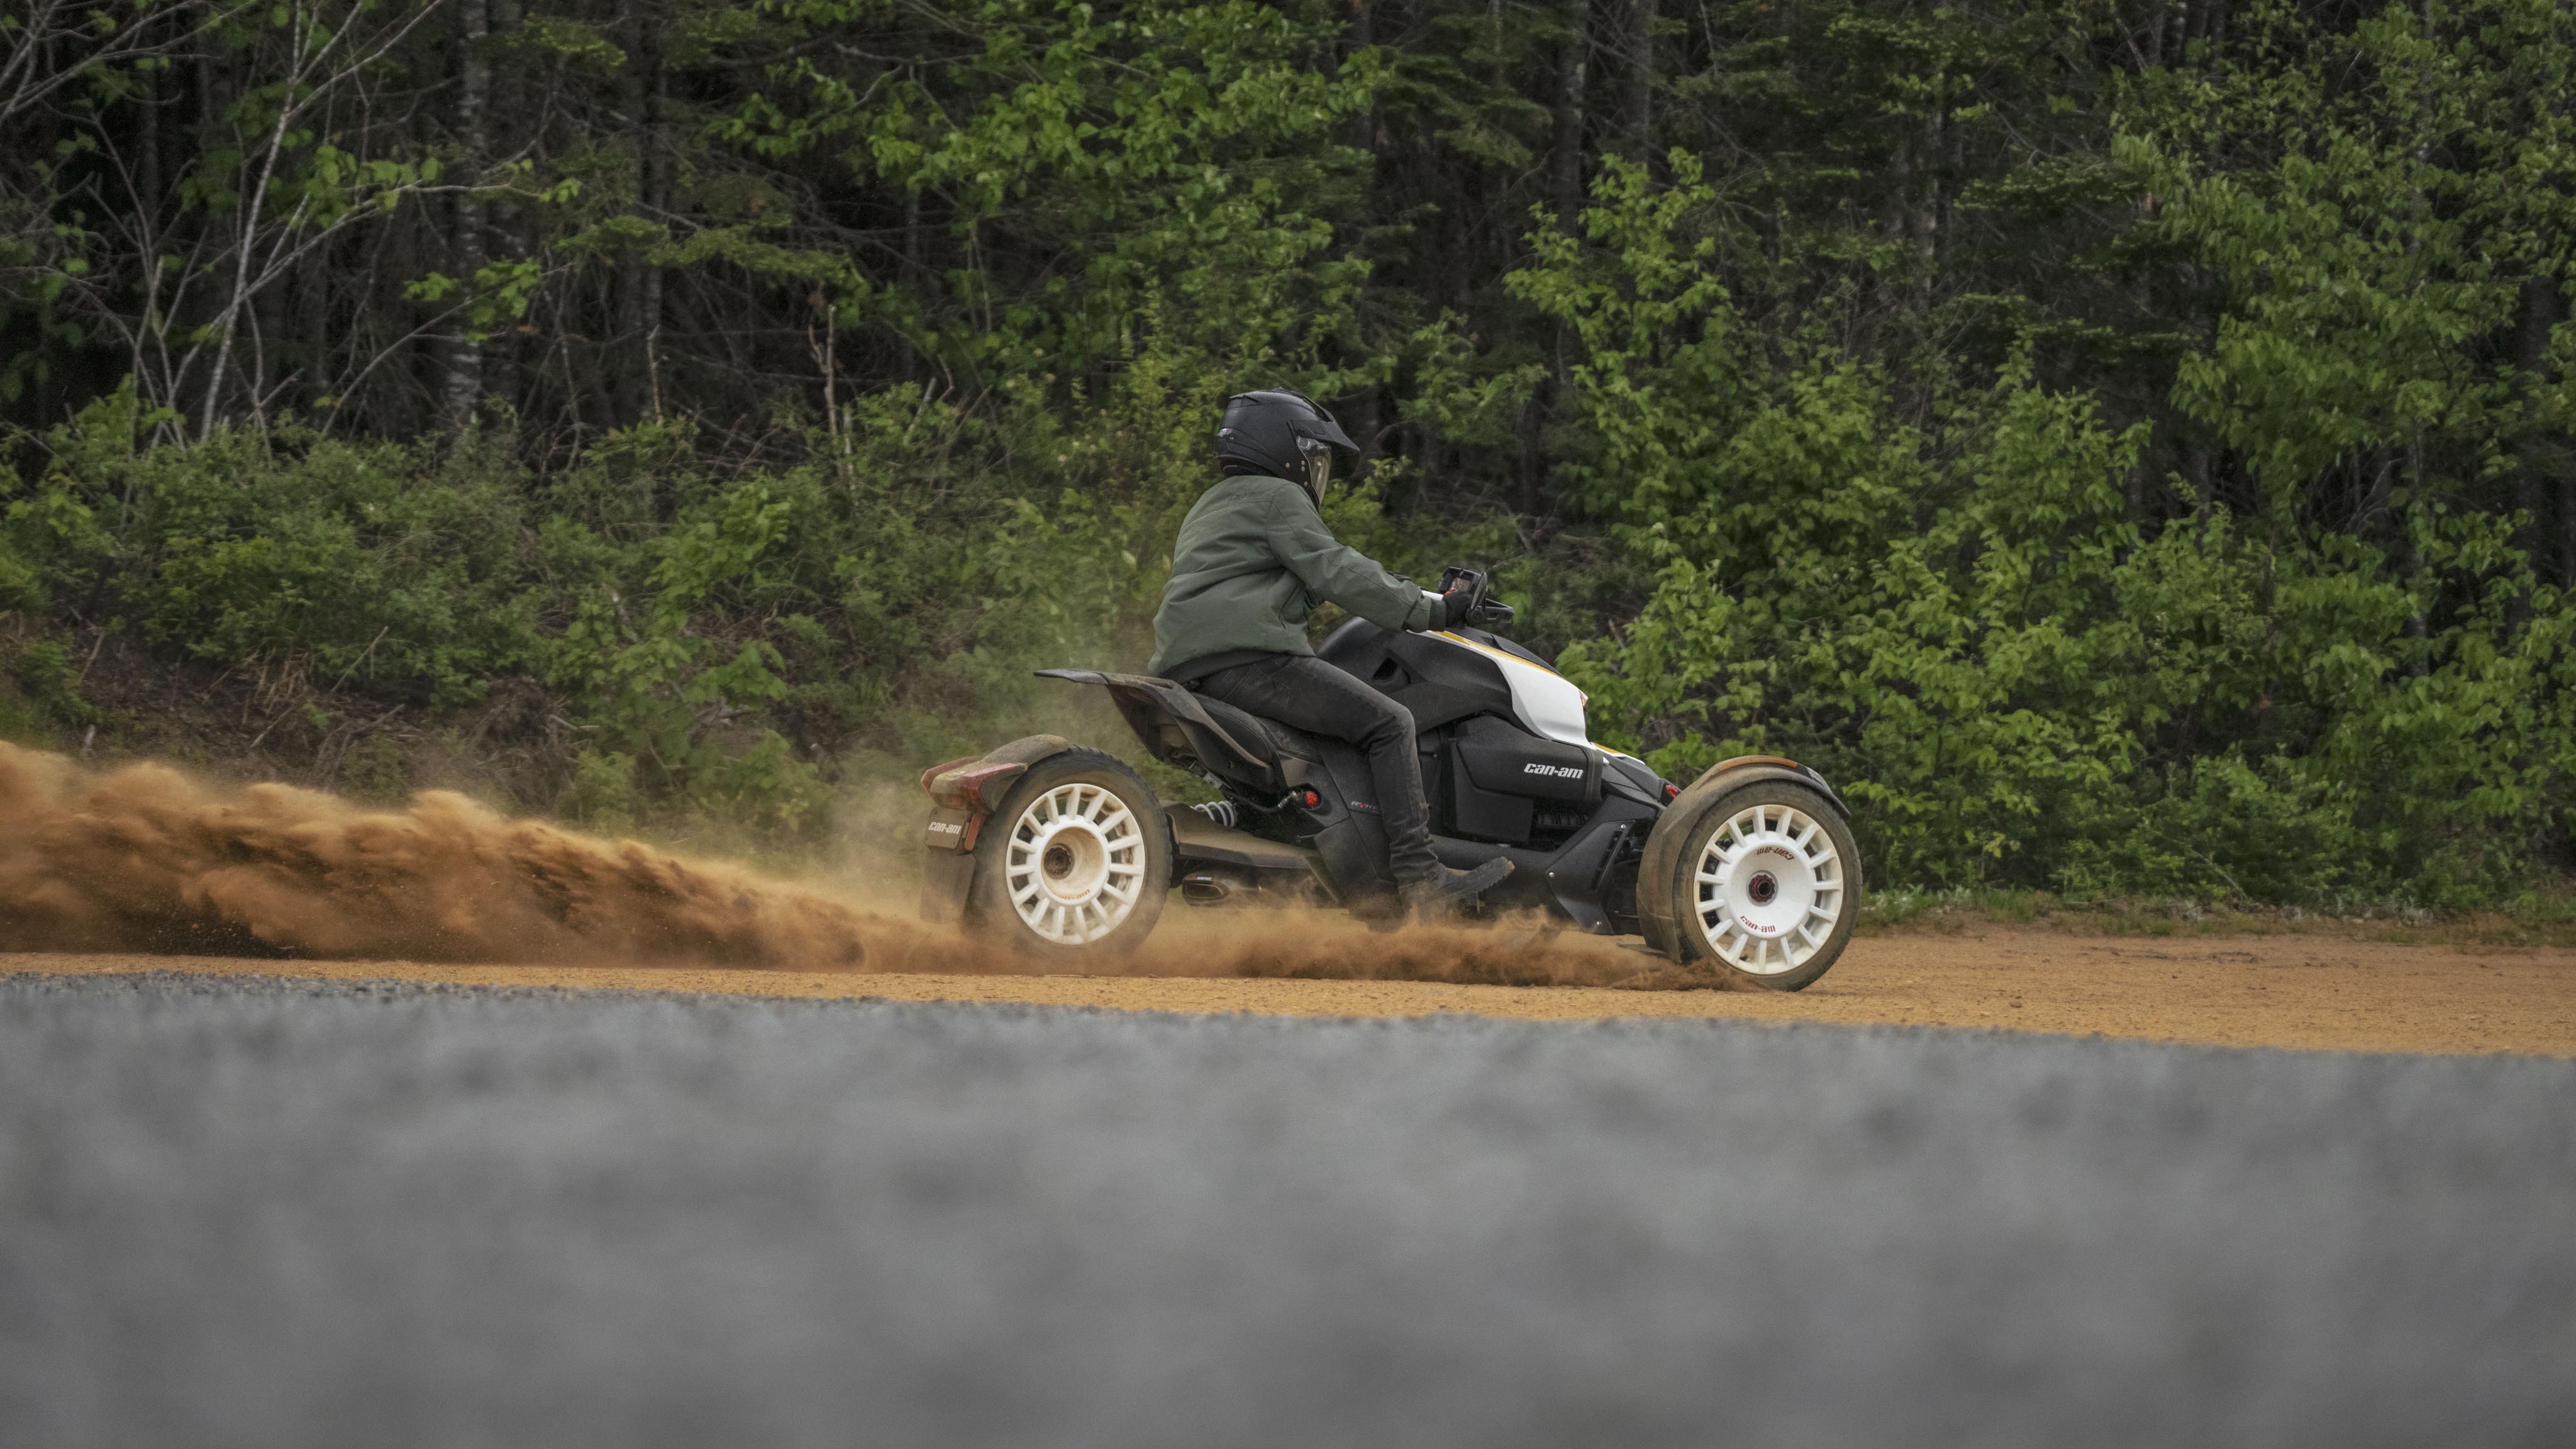 A man riding a Can-Am on a dirt road